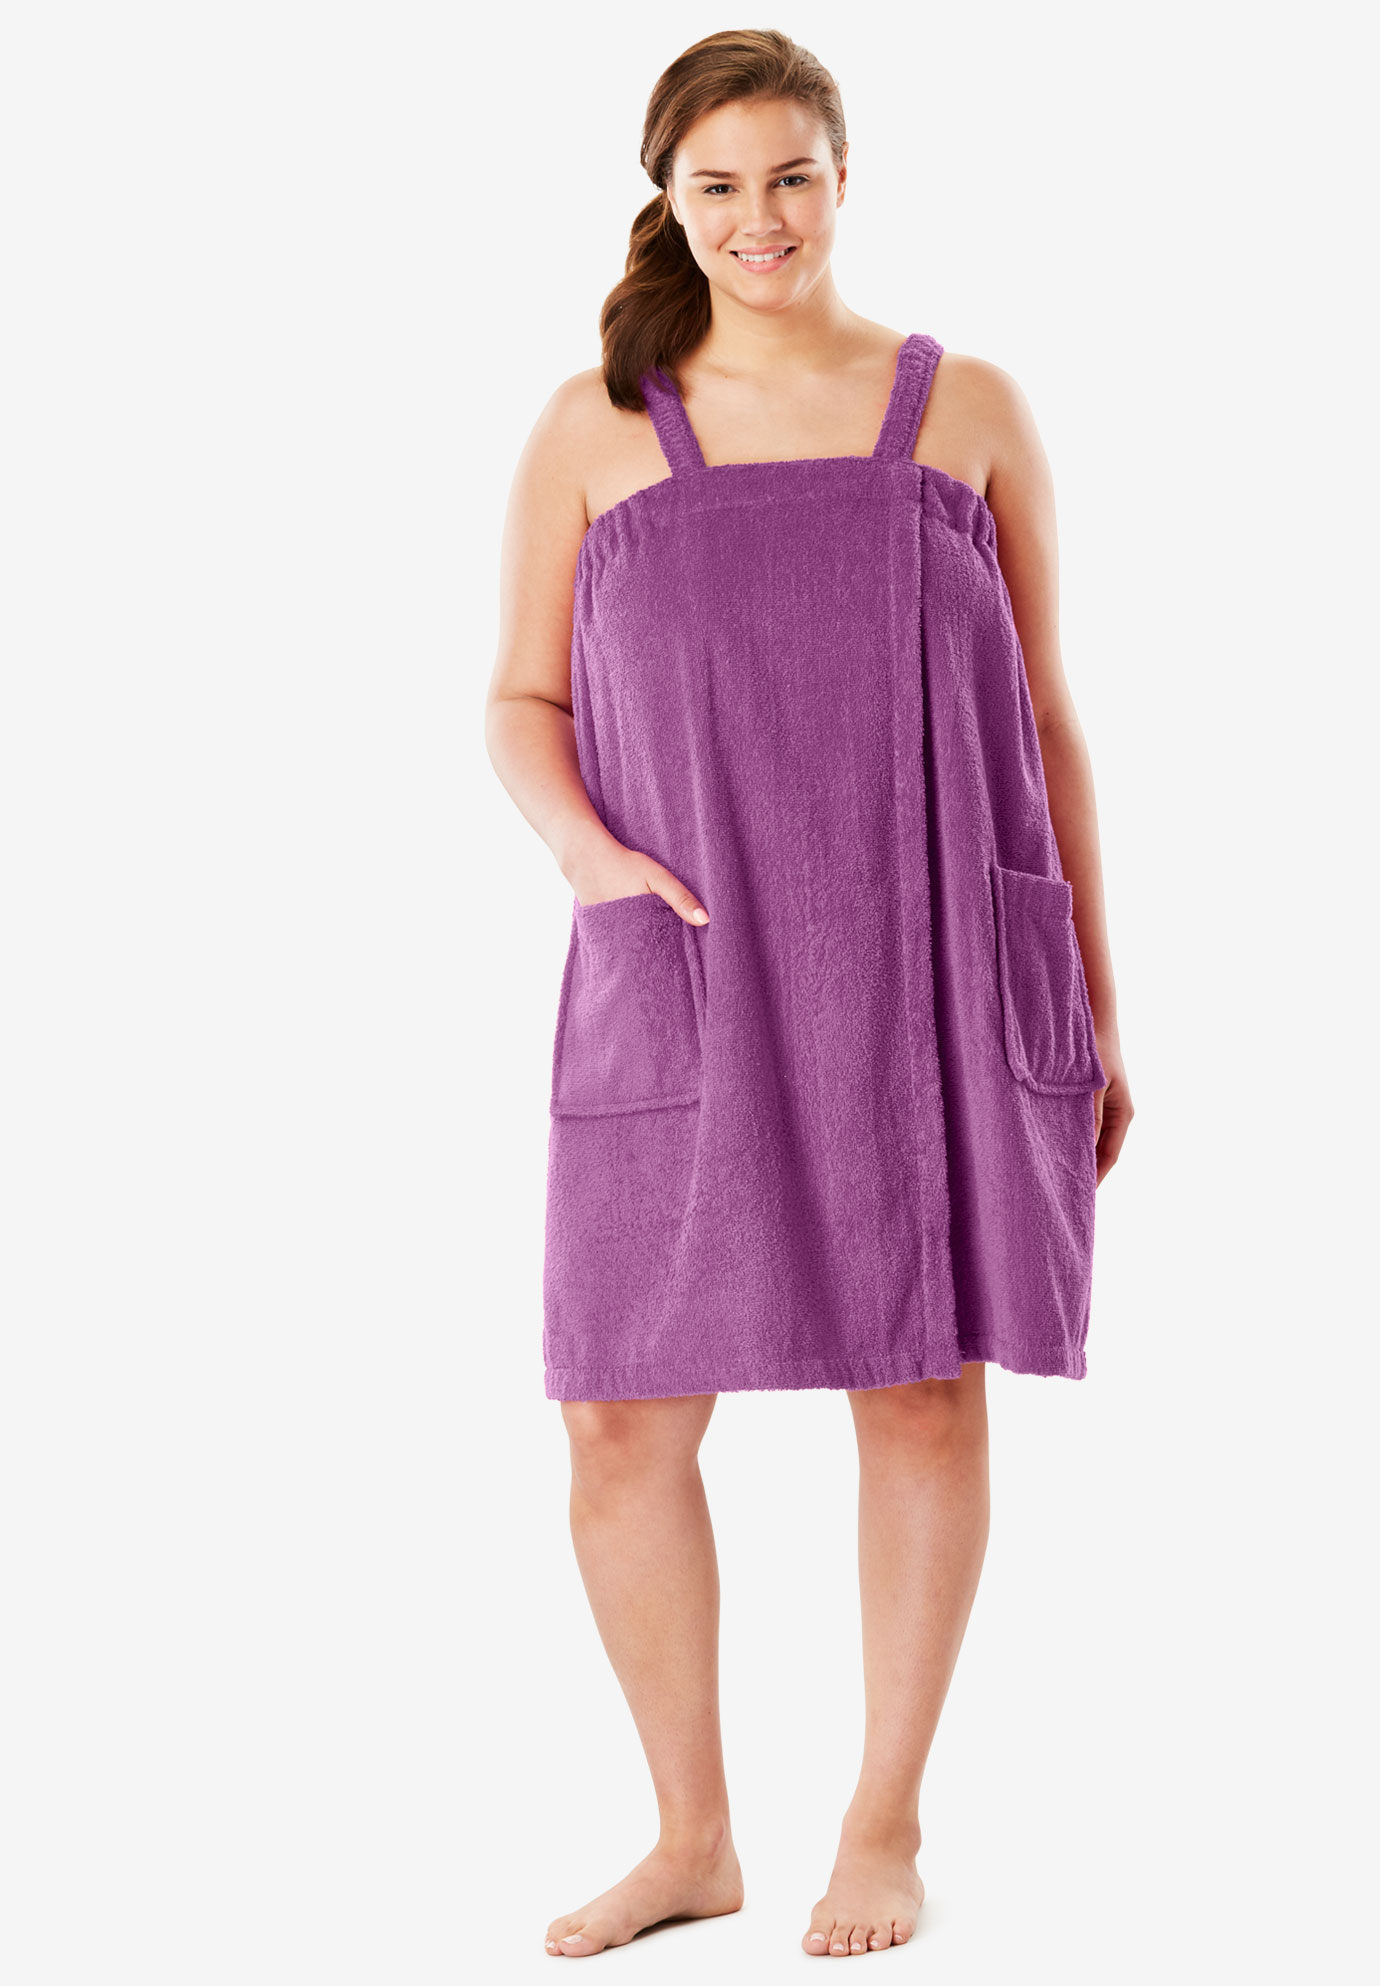 Terry Towel Wrap By Dreams And Co® Plus Size Robes And Slippers Full Beauty 